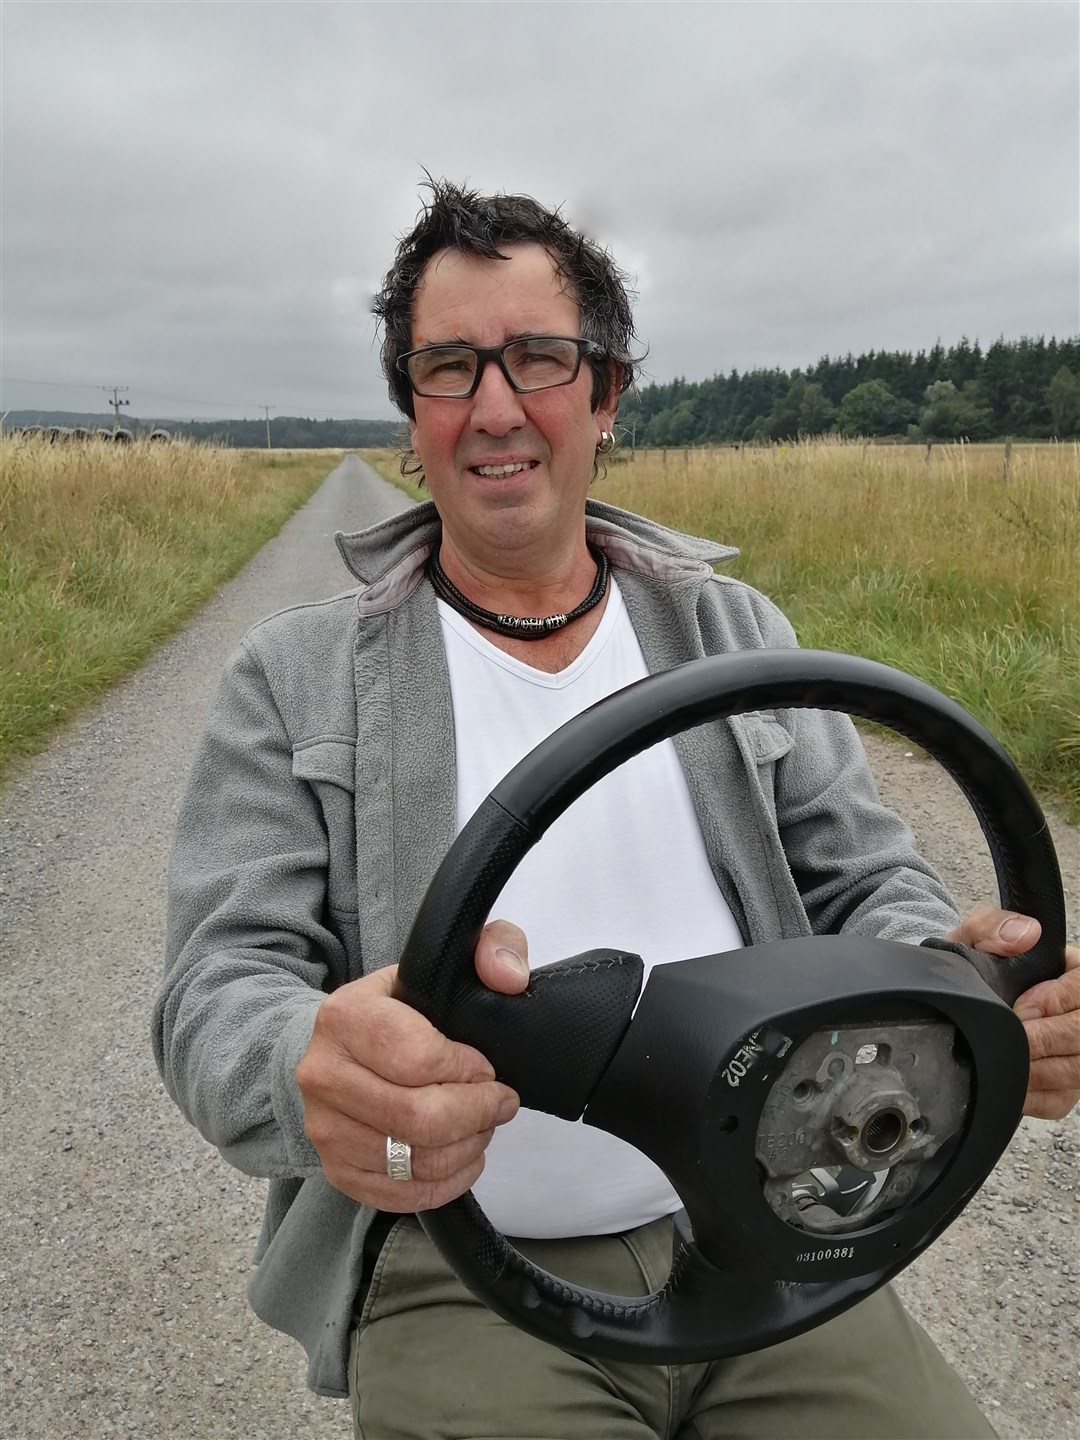 Jon Lane has the steering wheel – now he just needs the innovative new minibus to go with it.